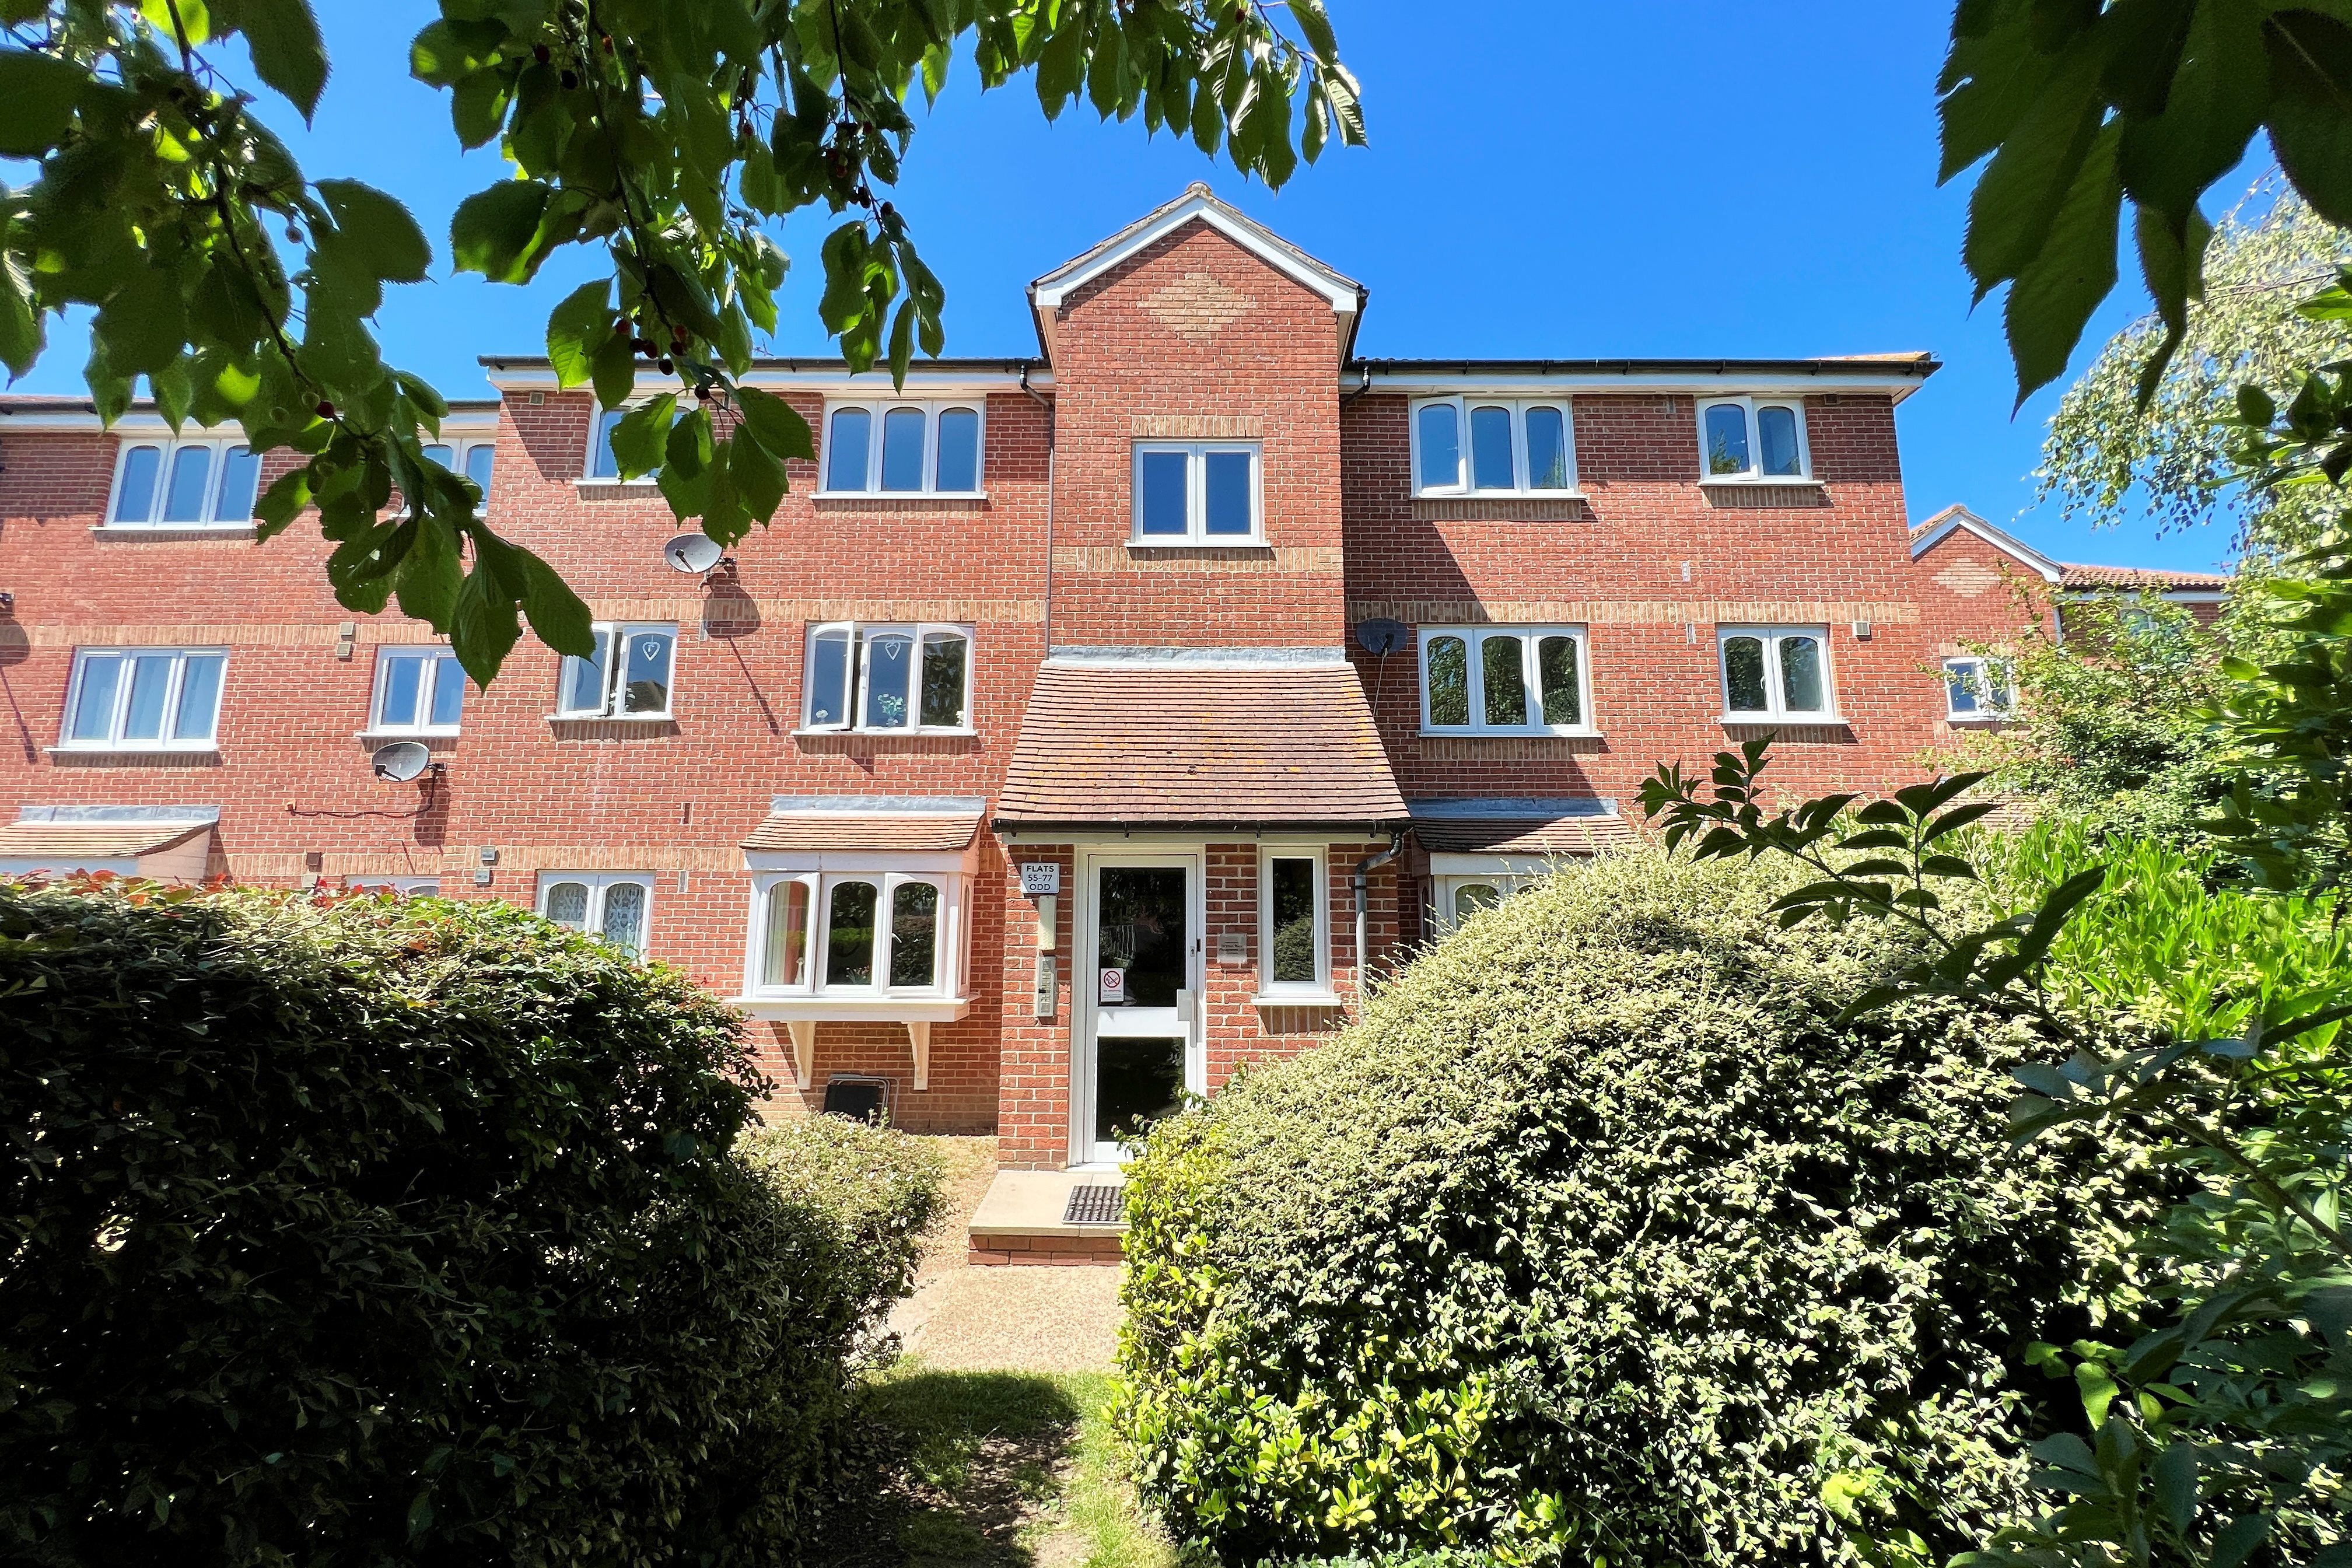 1 bed flat for sale in Lesney Gardens, Rochford, SS4 